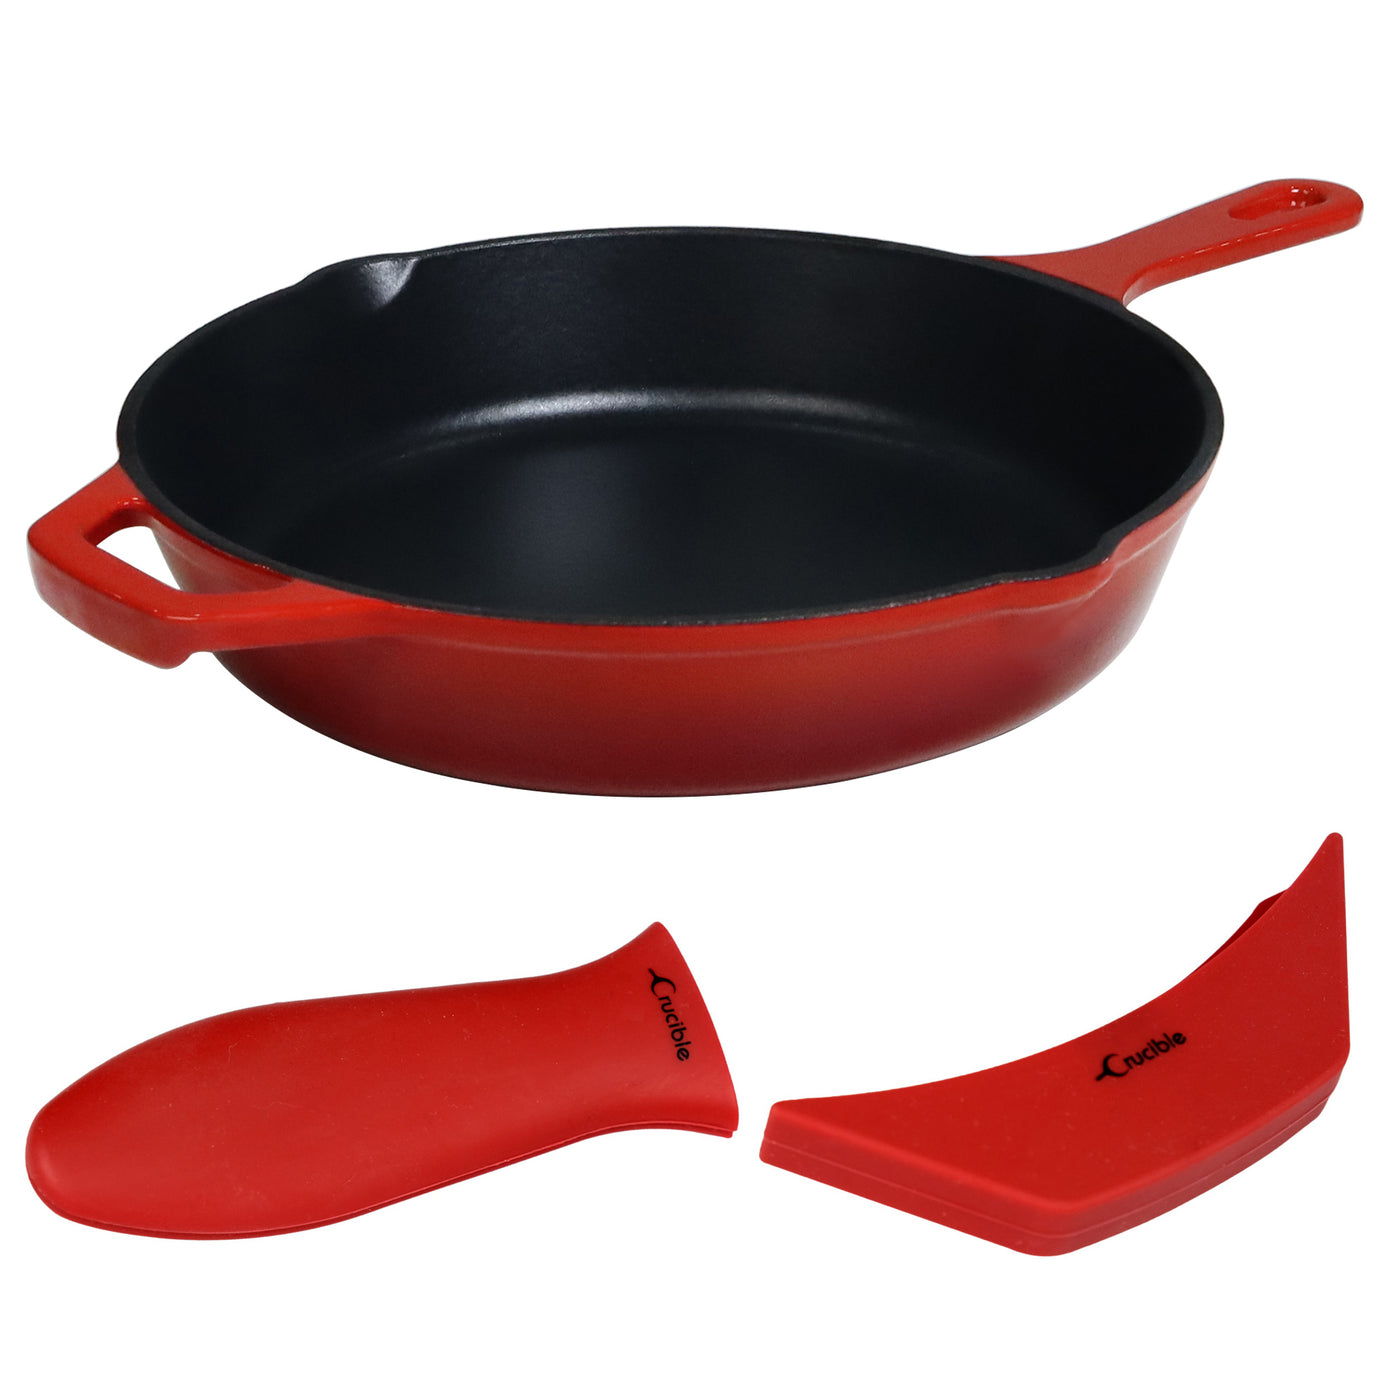 Silicone Hot Handle Holder (2-Pack) for Cast Iron Woks, Pots, Dutch Ovens,  Small Skillets, Assist Handle, Oven Trays, Plates - Potholders - Red